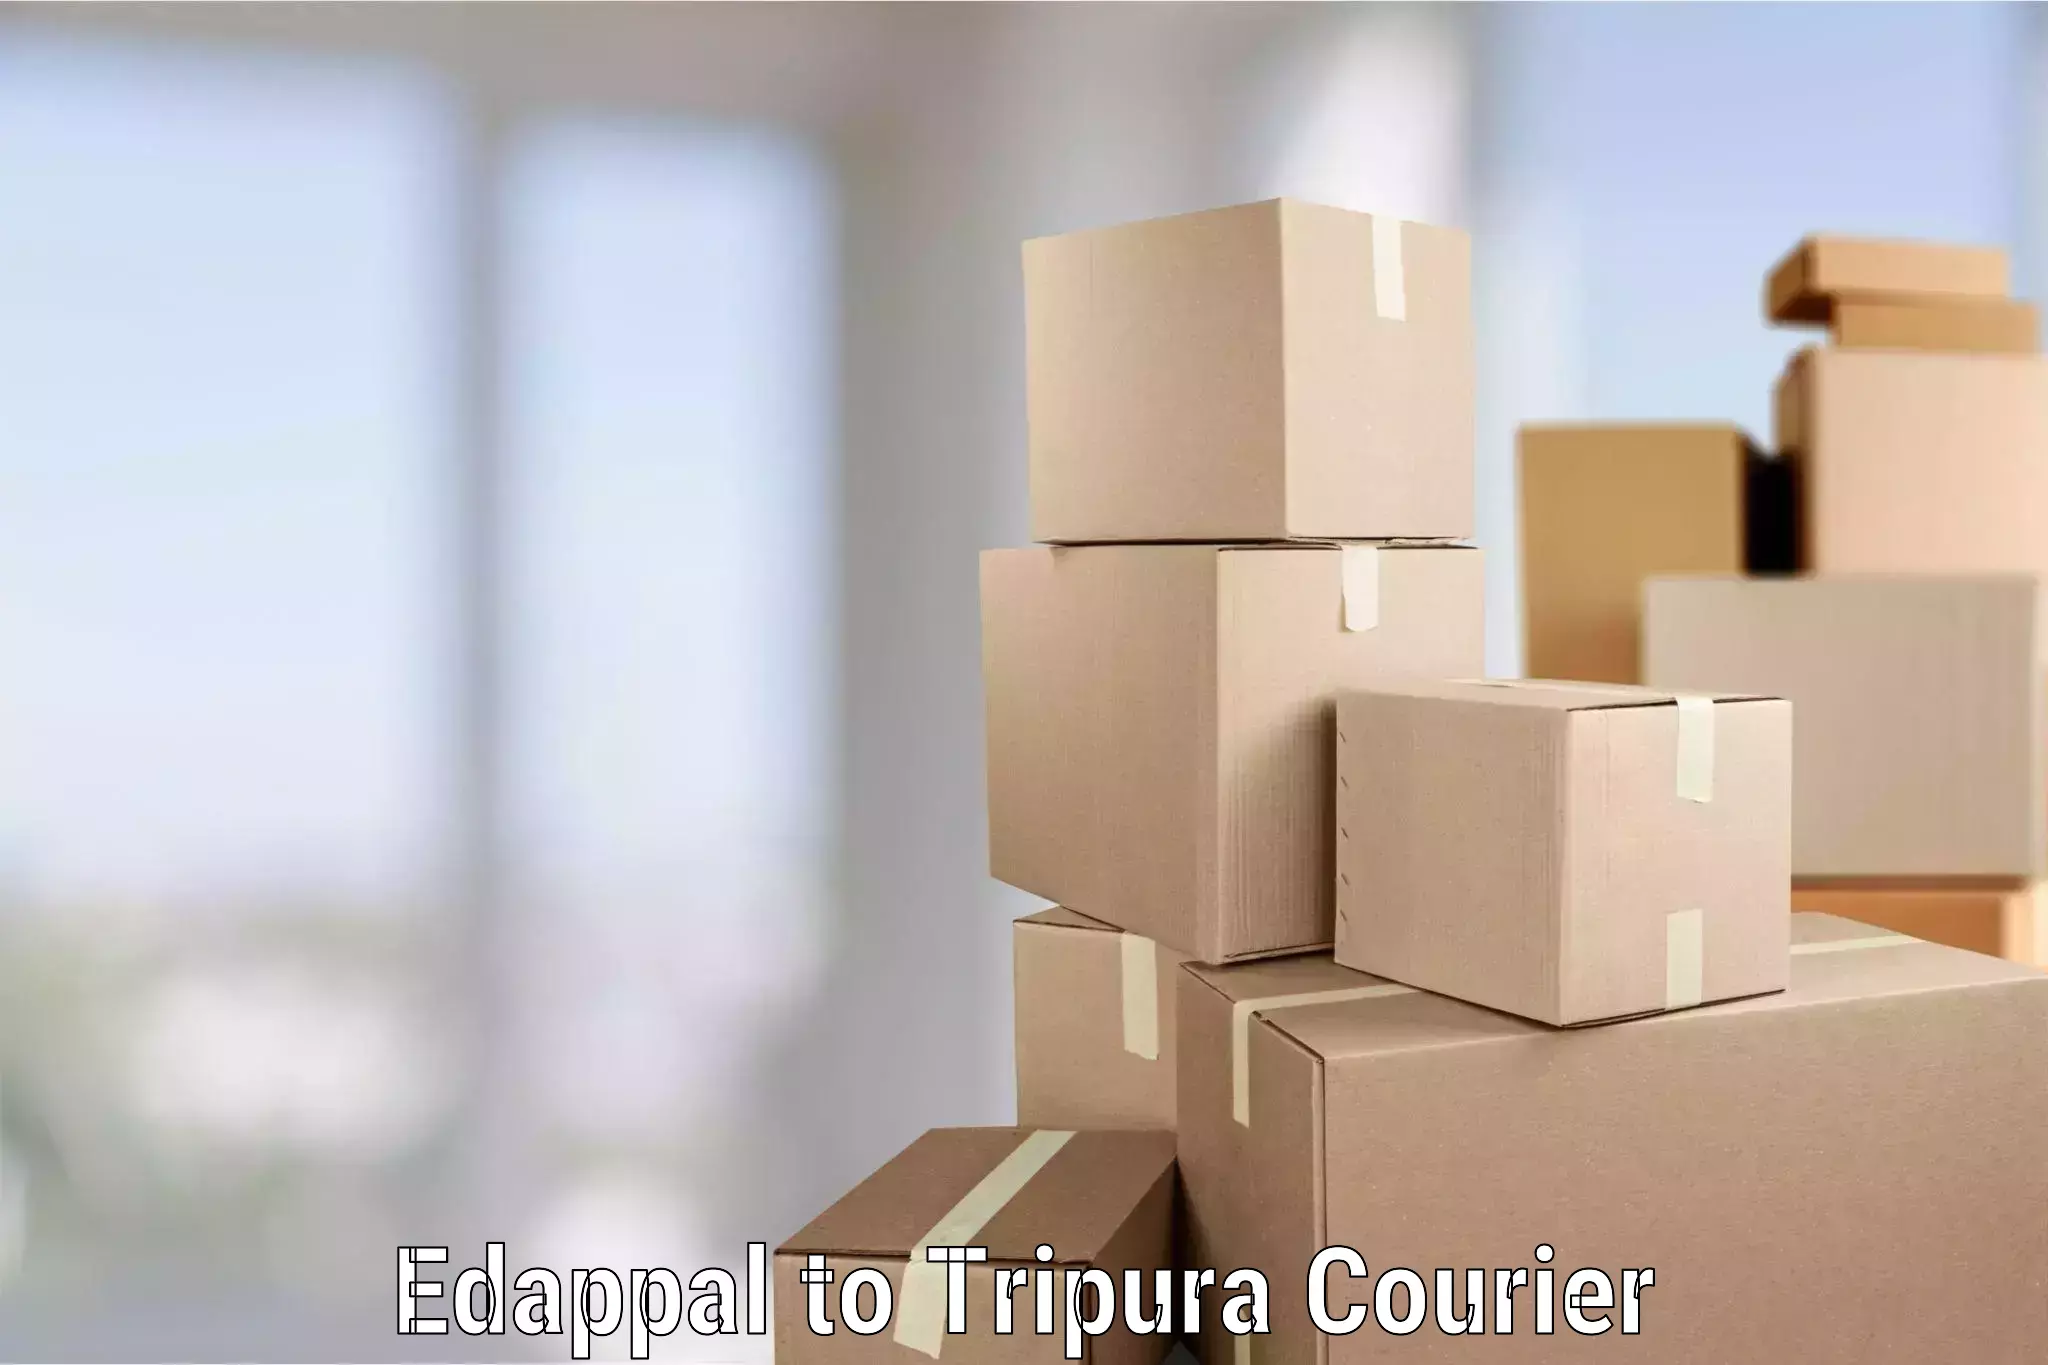 Professional packing and transport Edappal to Udaipur Tripura